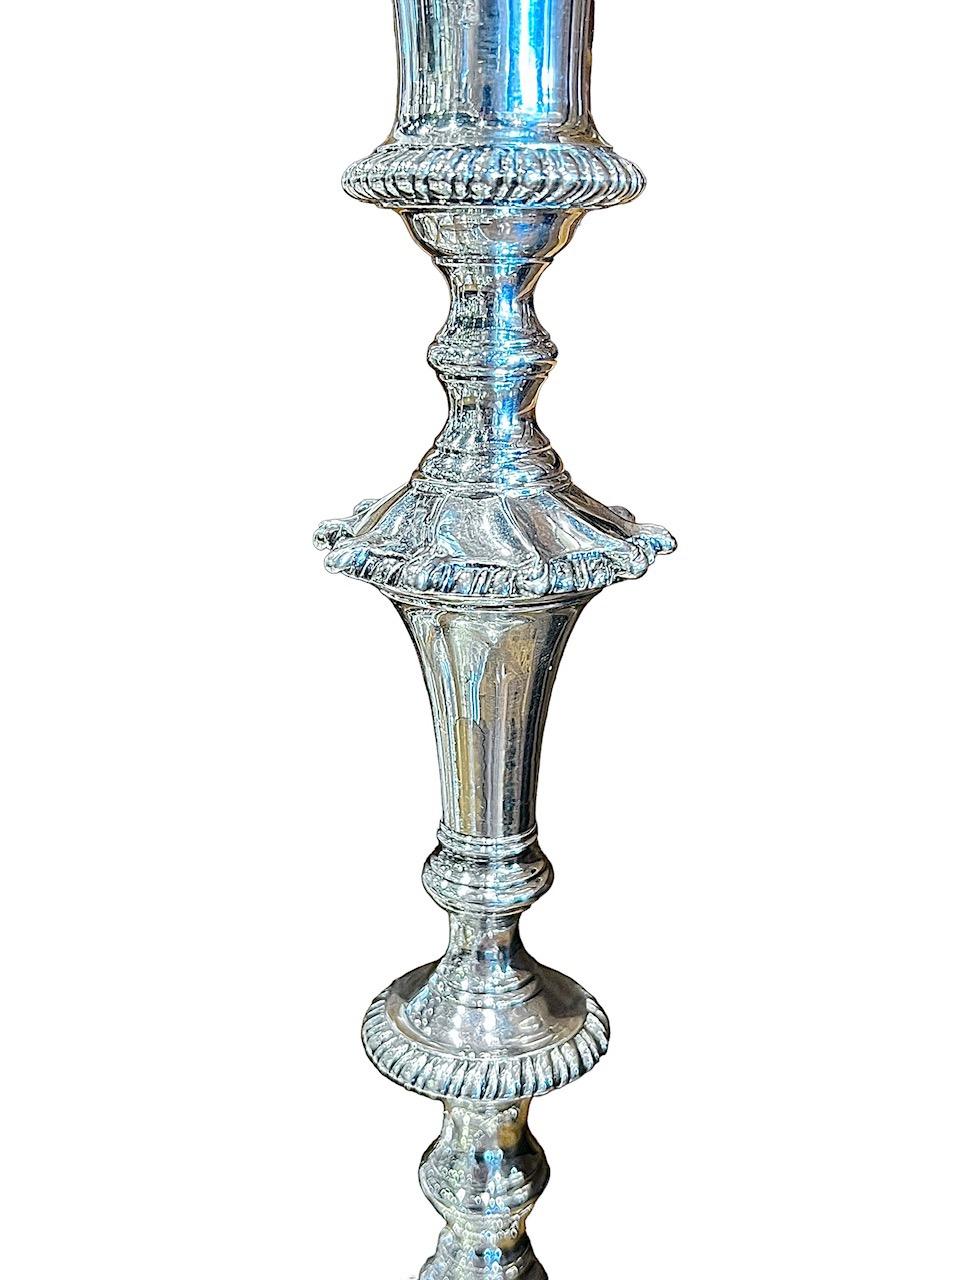 1764, Set of Four George III Sterling Silver Candlesticks, English For Sale 7